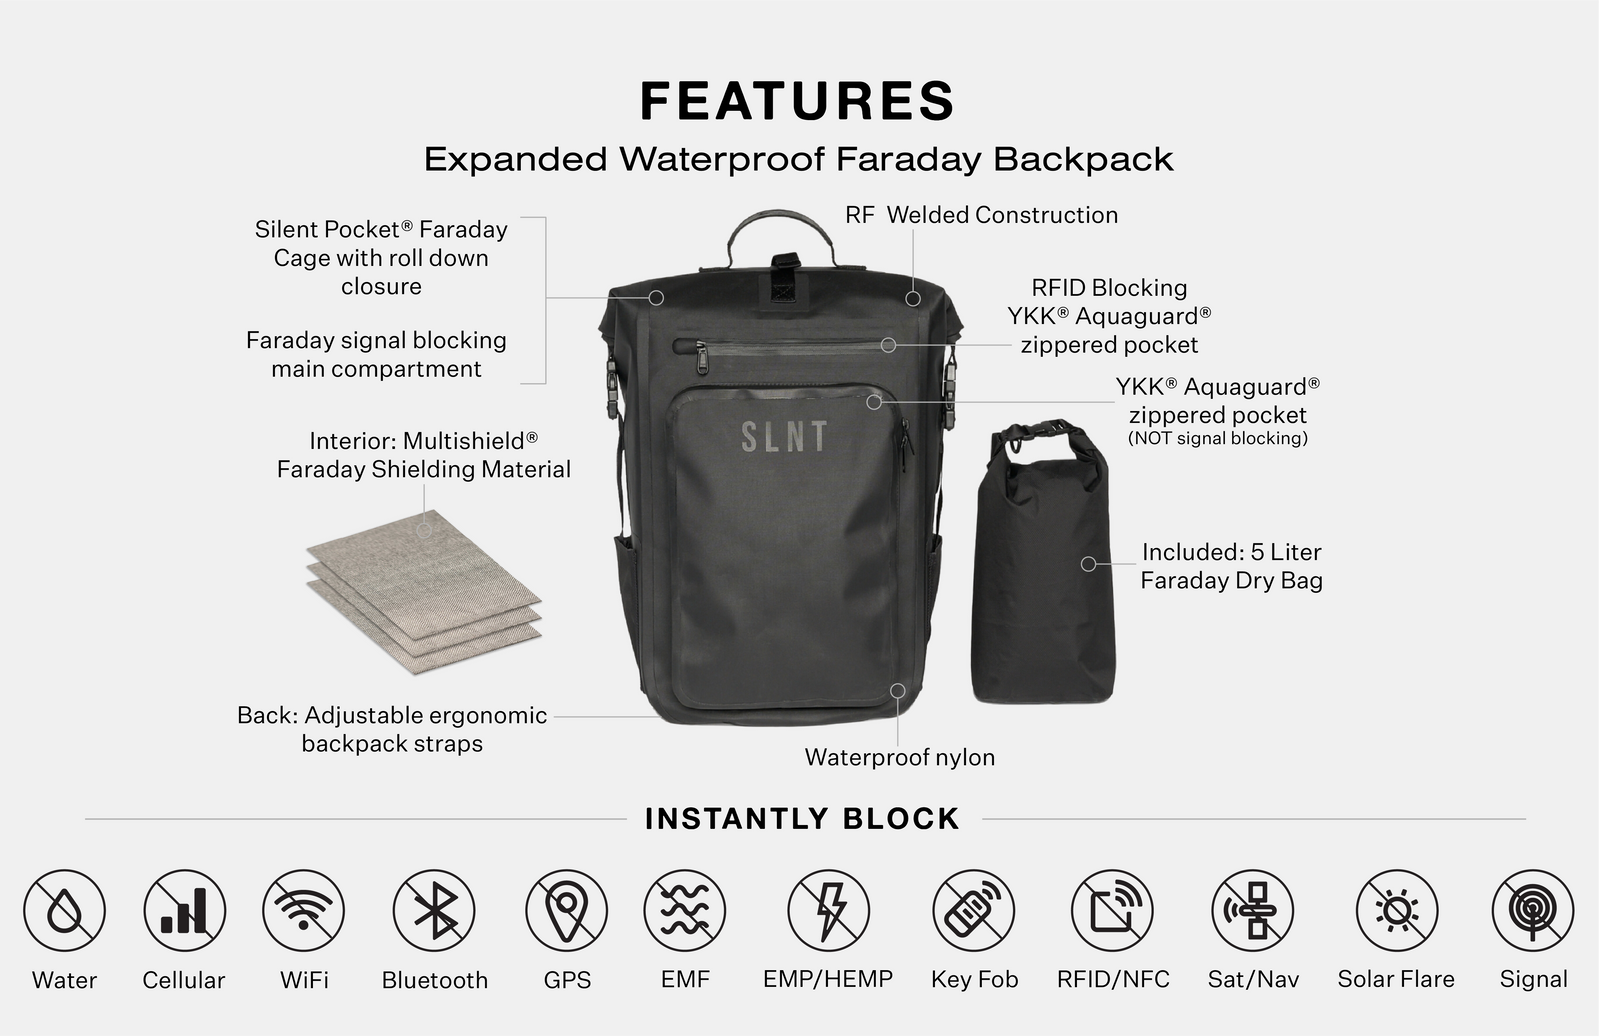 Expanded_Waterproof_Faraday_Backpack